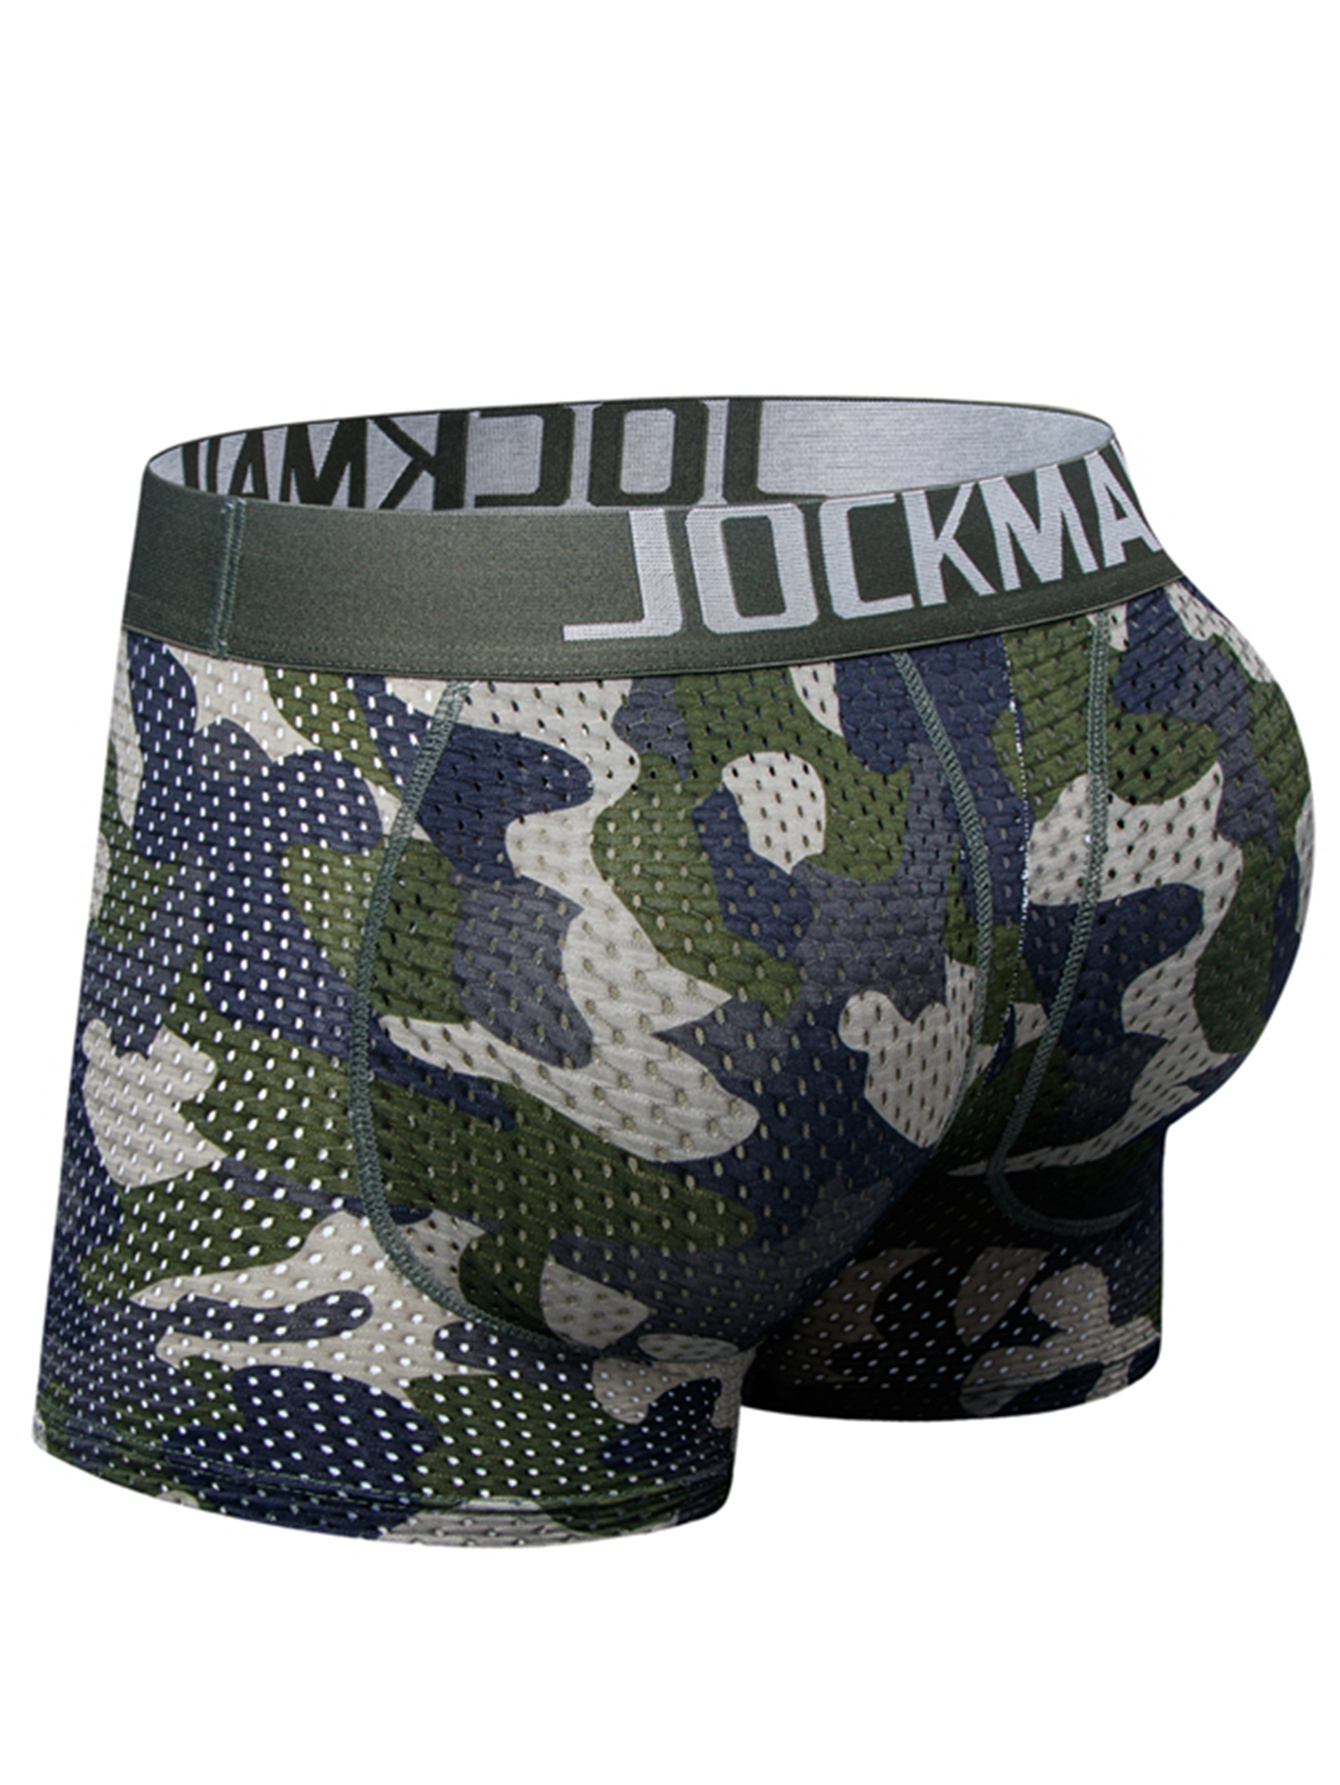 Stance Underwear for Men Male Fashion Underpants Knickers Sexy